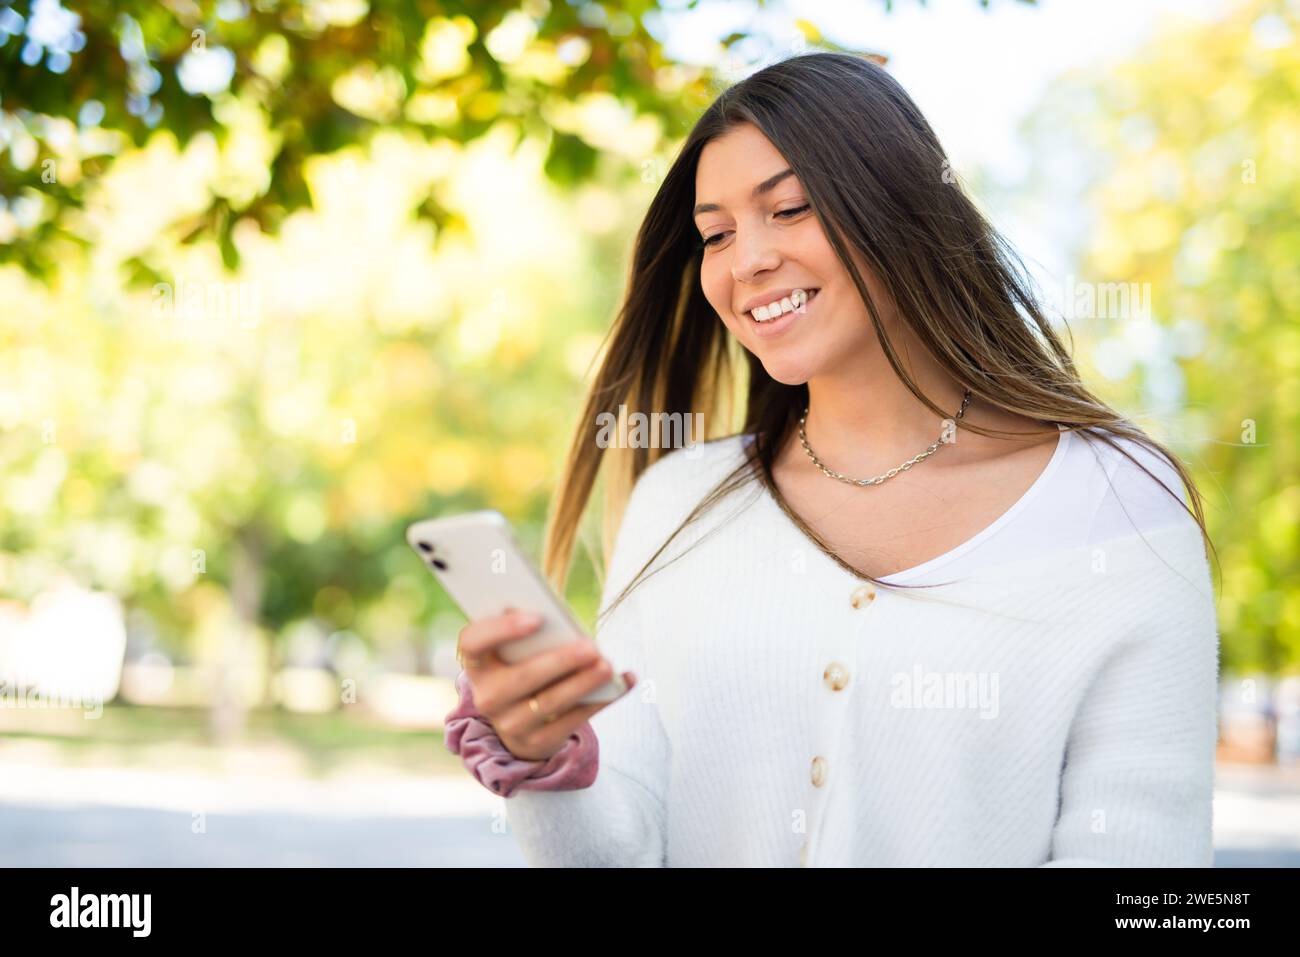 Woman walking in a park while using her smartphone Stock Photo